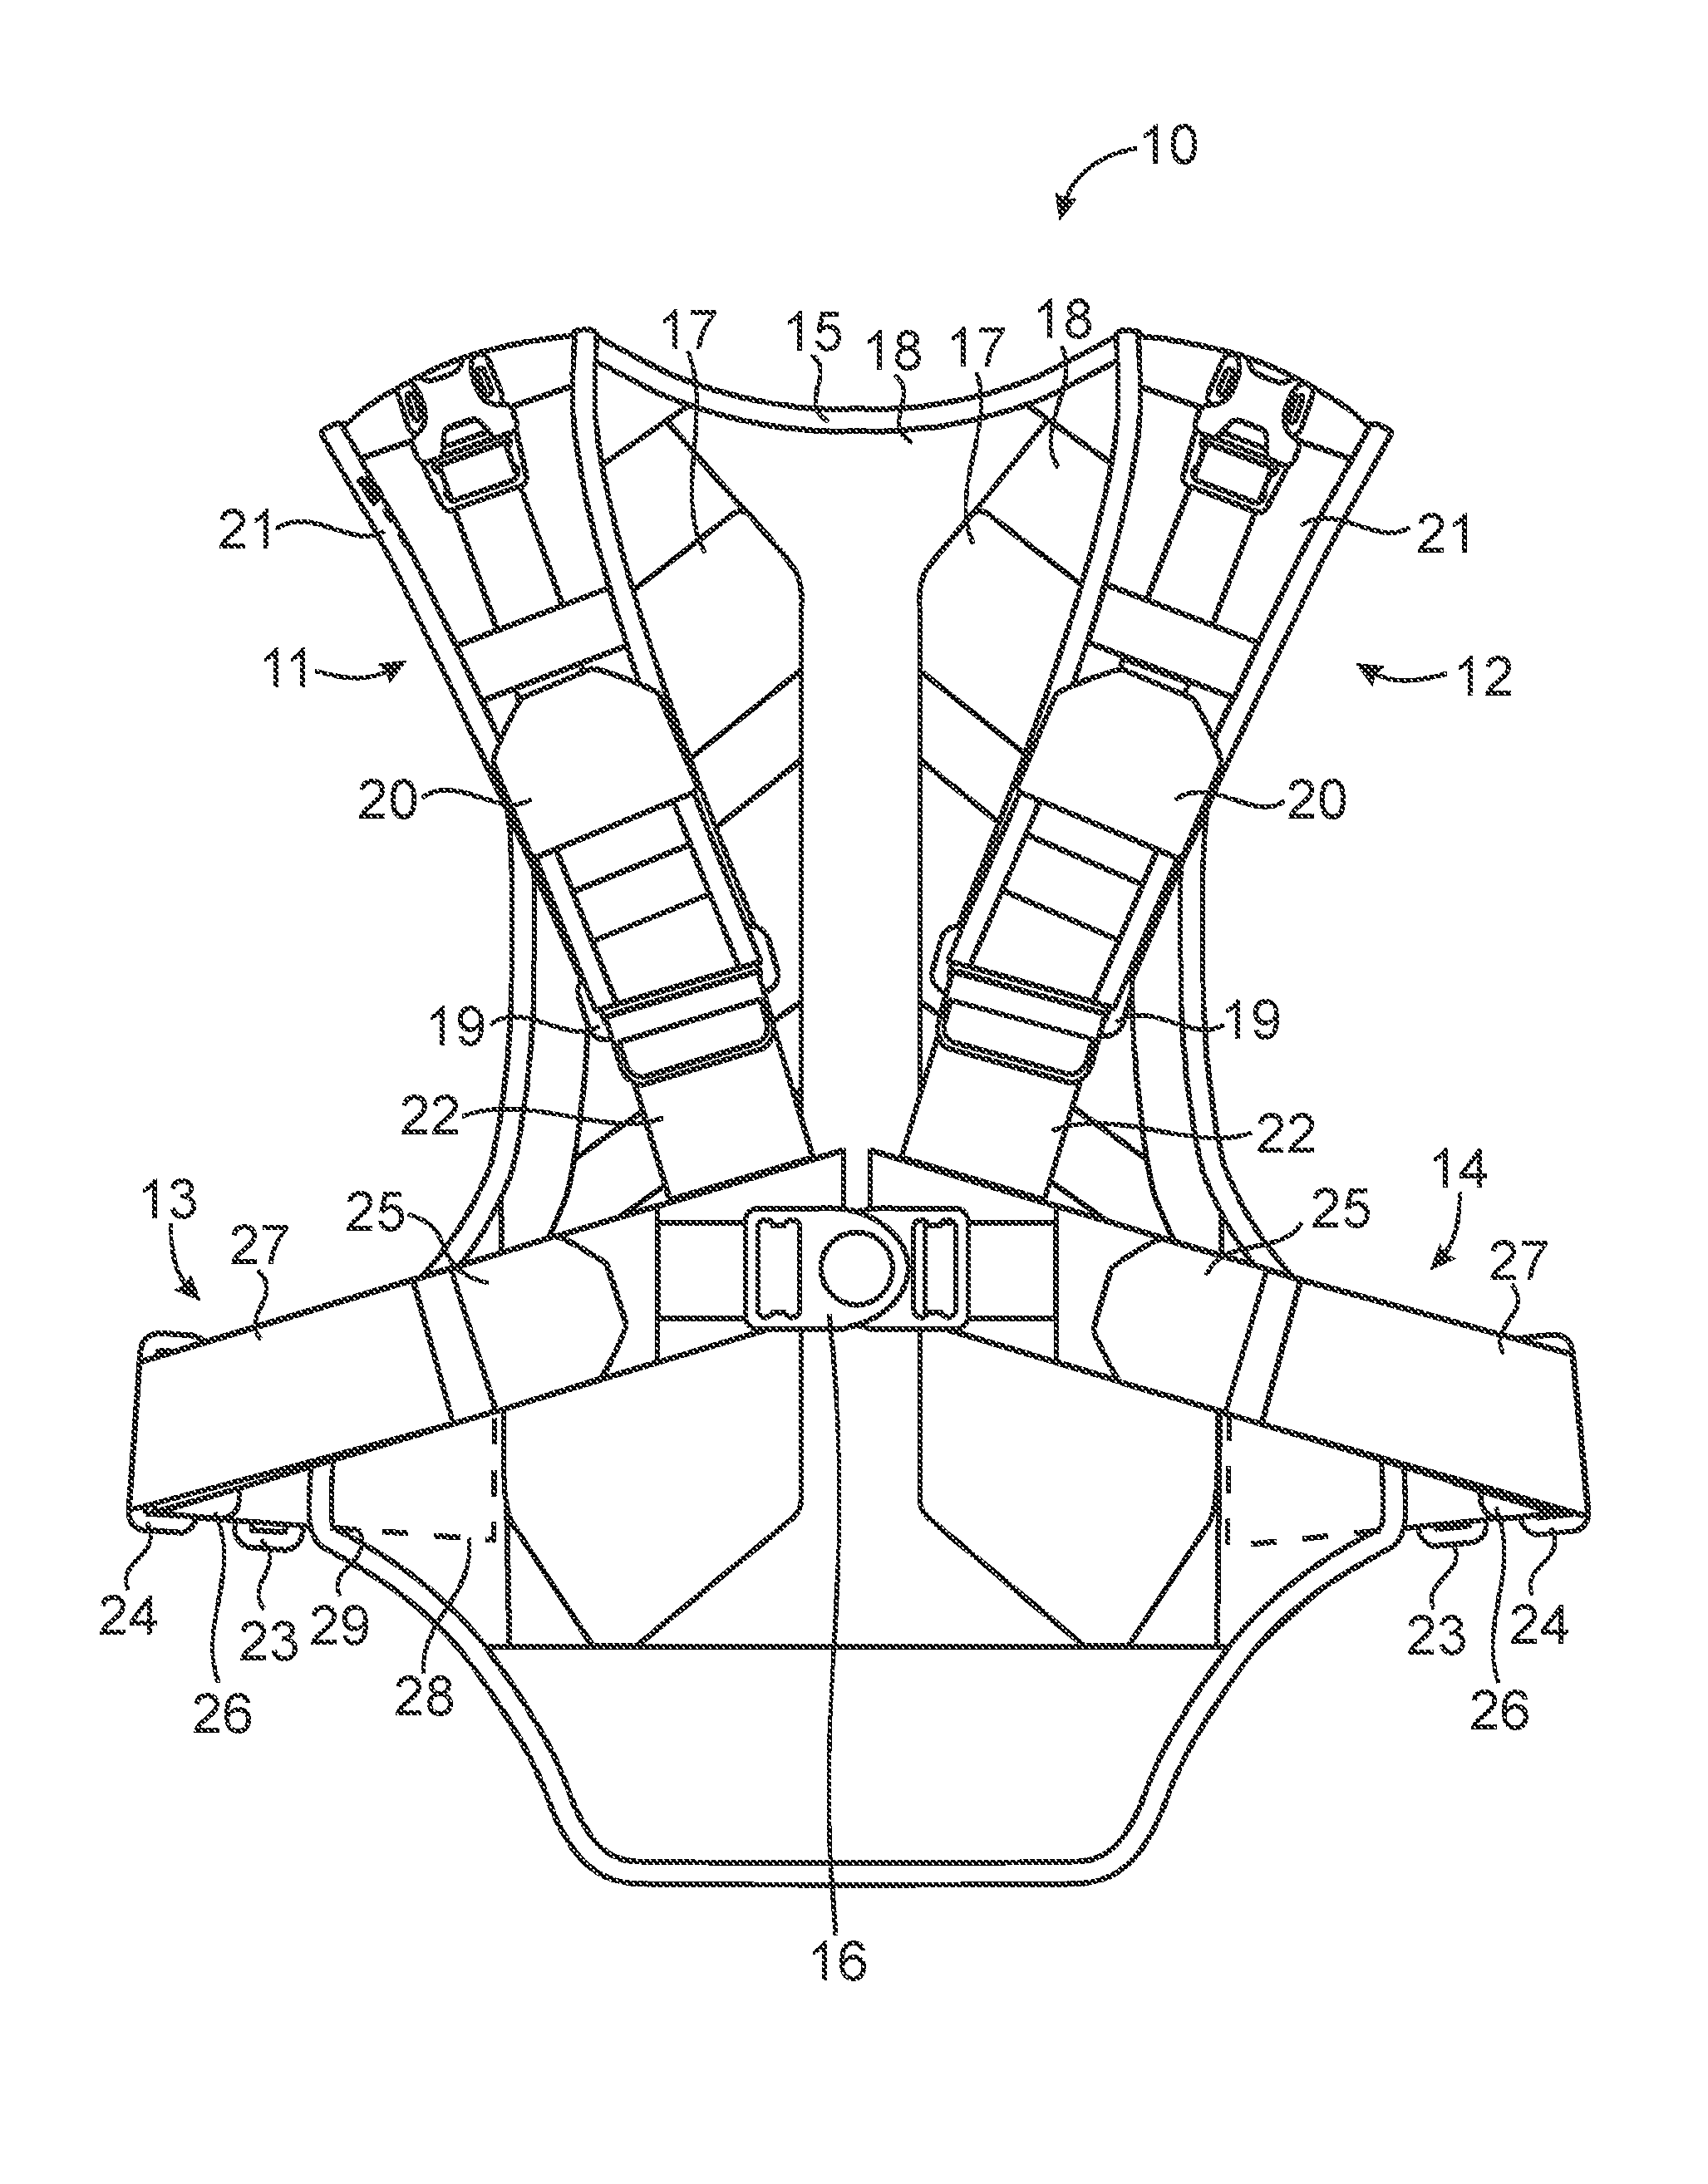 Device for carrying an object